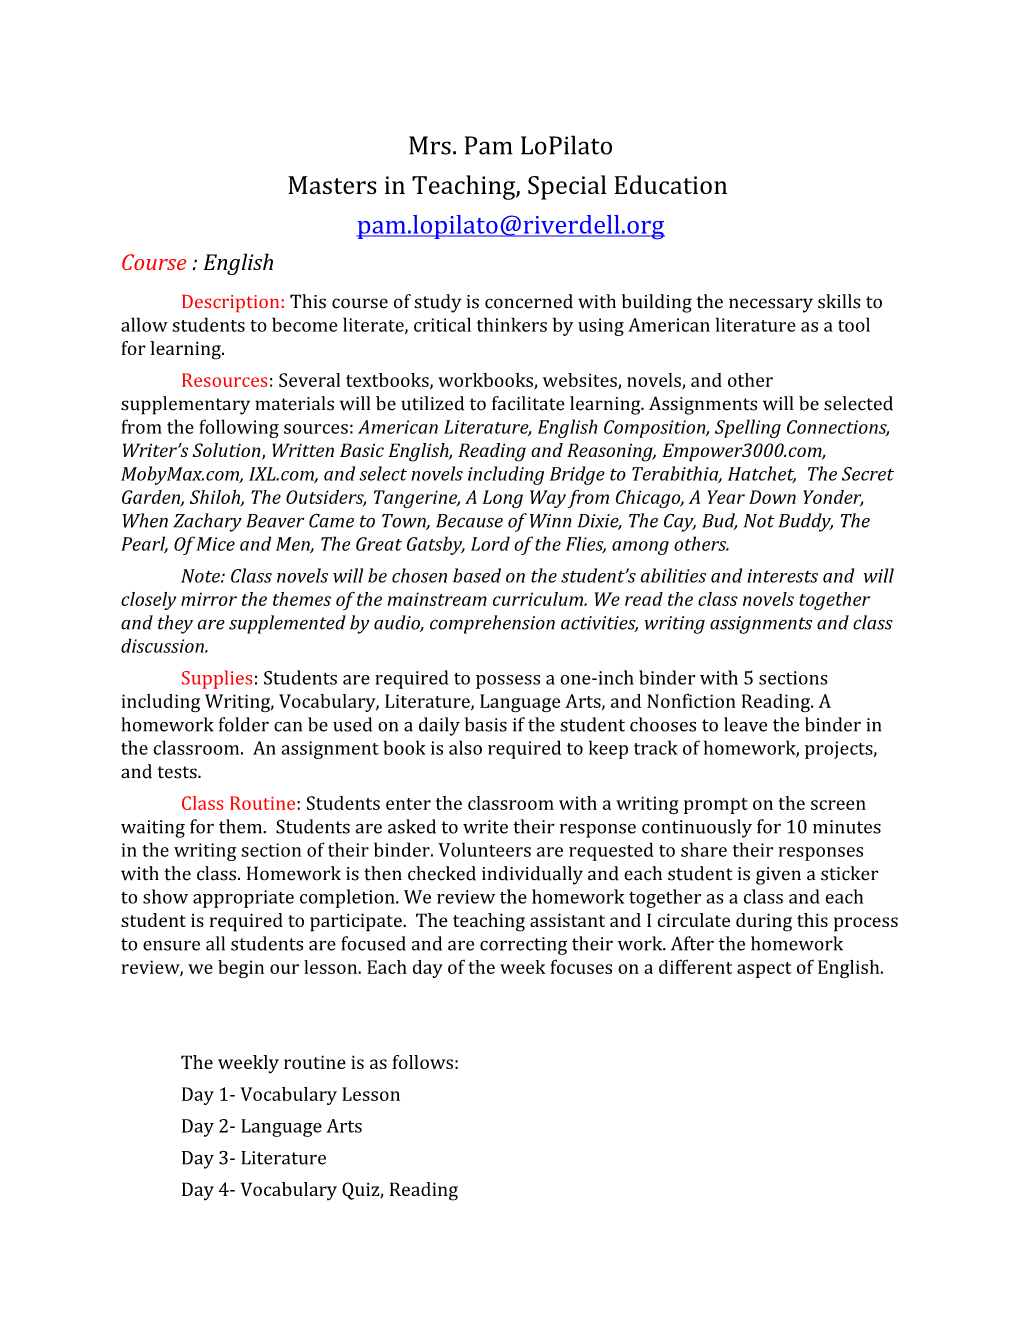 Masters in Teaching, Special Education